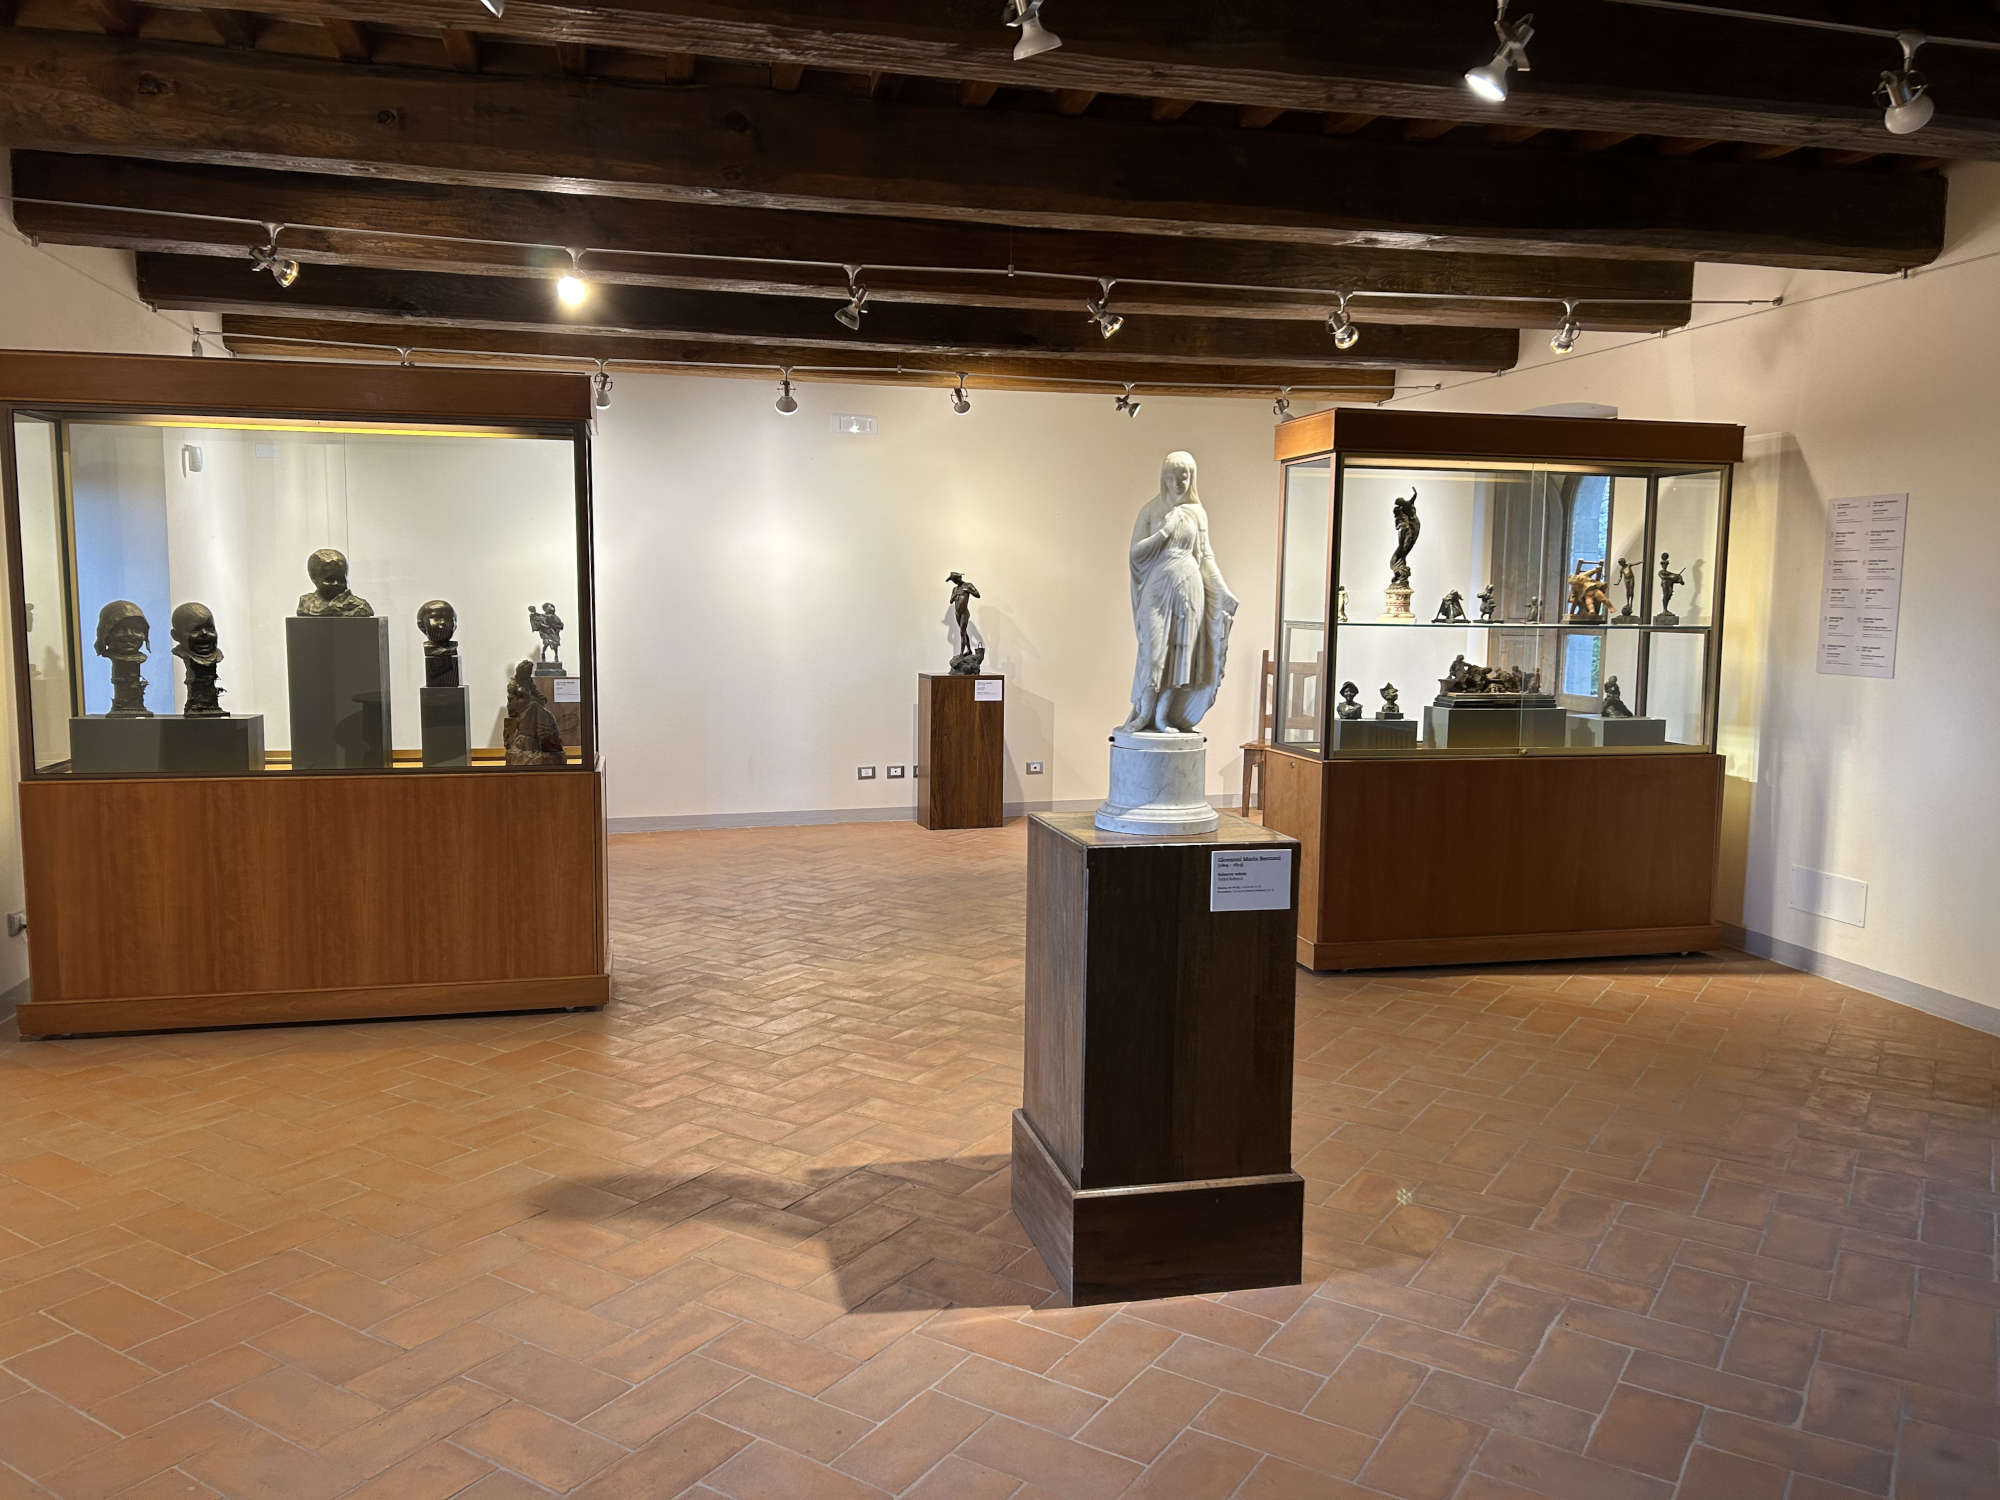 The collection of sketches and bronzes by Italian artists active in the 19th and 20th centuries